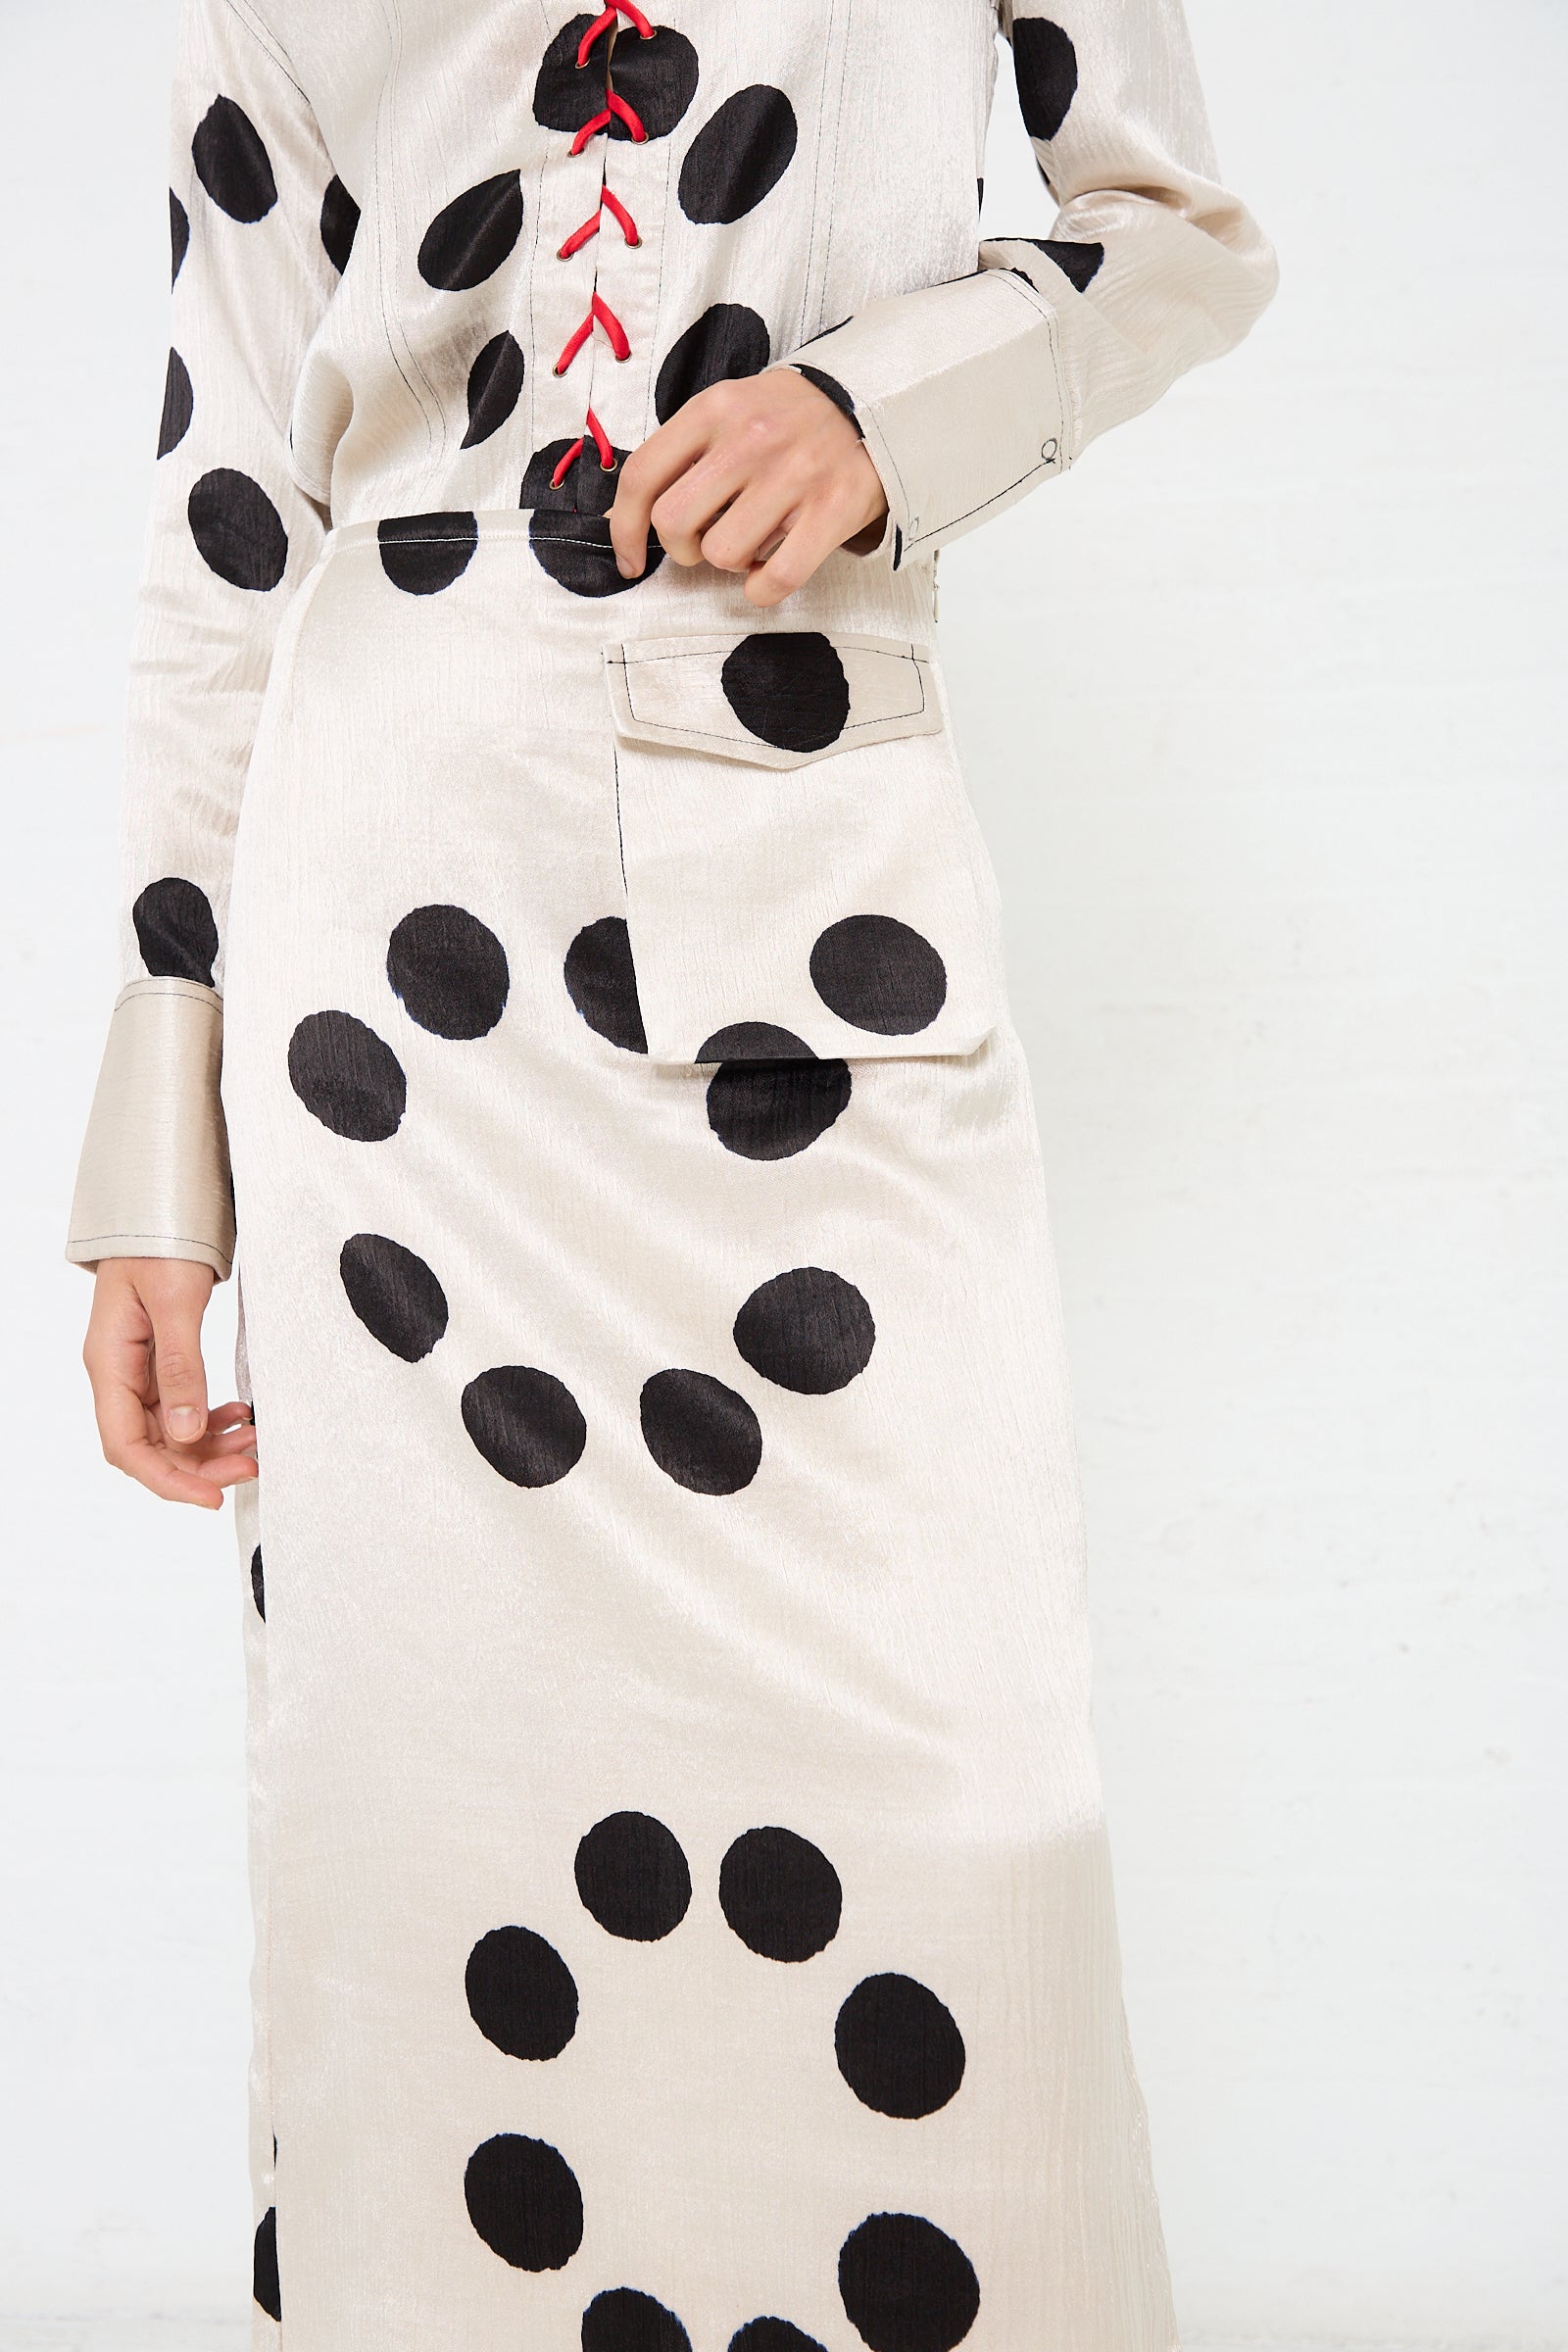 Person wearing a long, light-colored dress with large black polka dots and red lacing detail on the front, featuring a handwoven Silk Mashroo Midi Skirt by TIGRA TIGRA with visible pocket and subtle contrast topstitching.